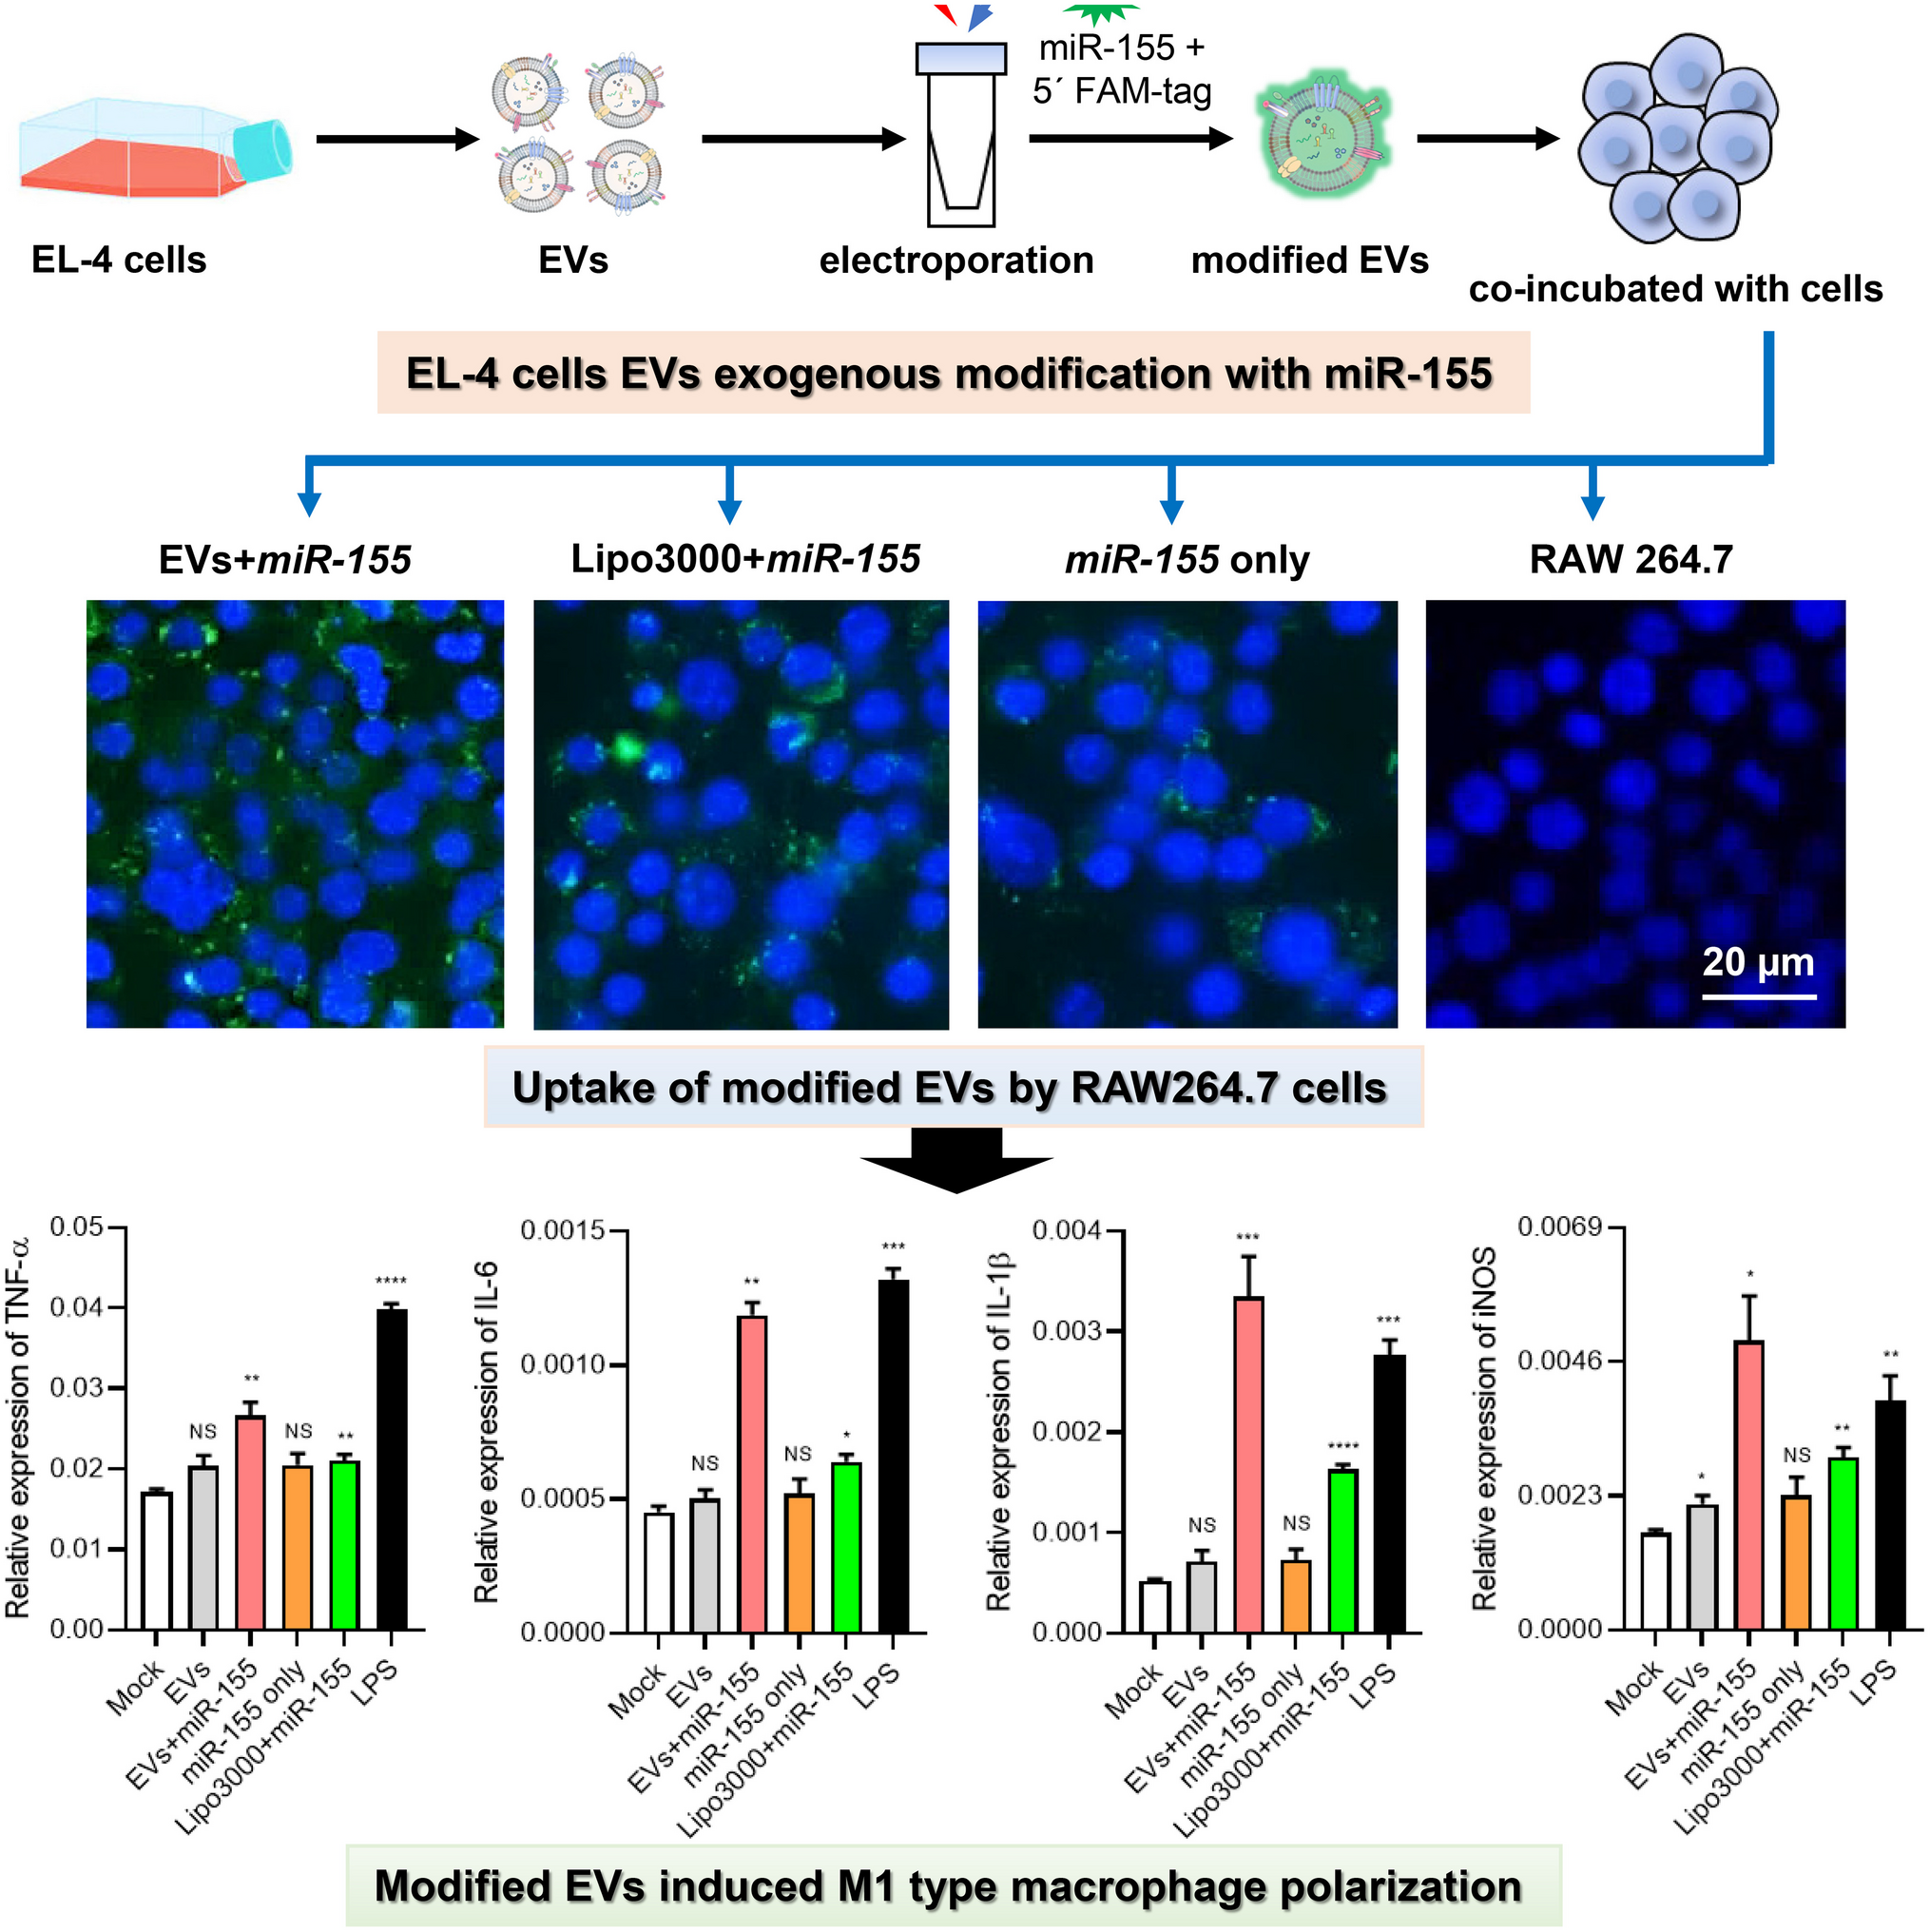 Exogenous modification of EL-4 T cell extracellular vesicles with miR-155 induce macrophage into M1-type polarization